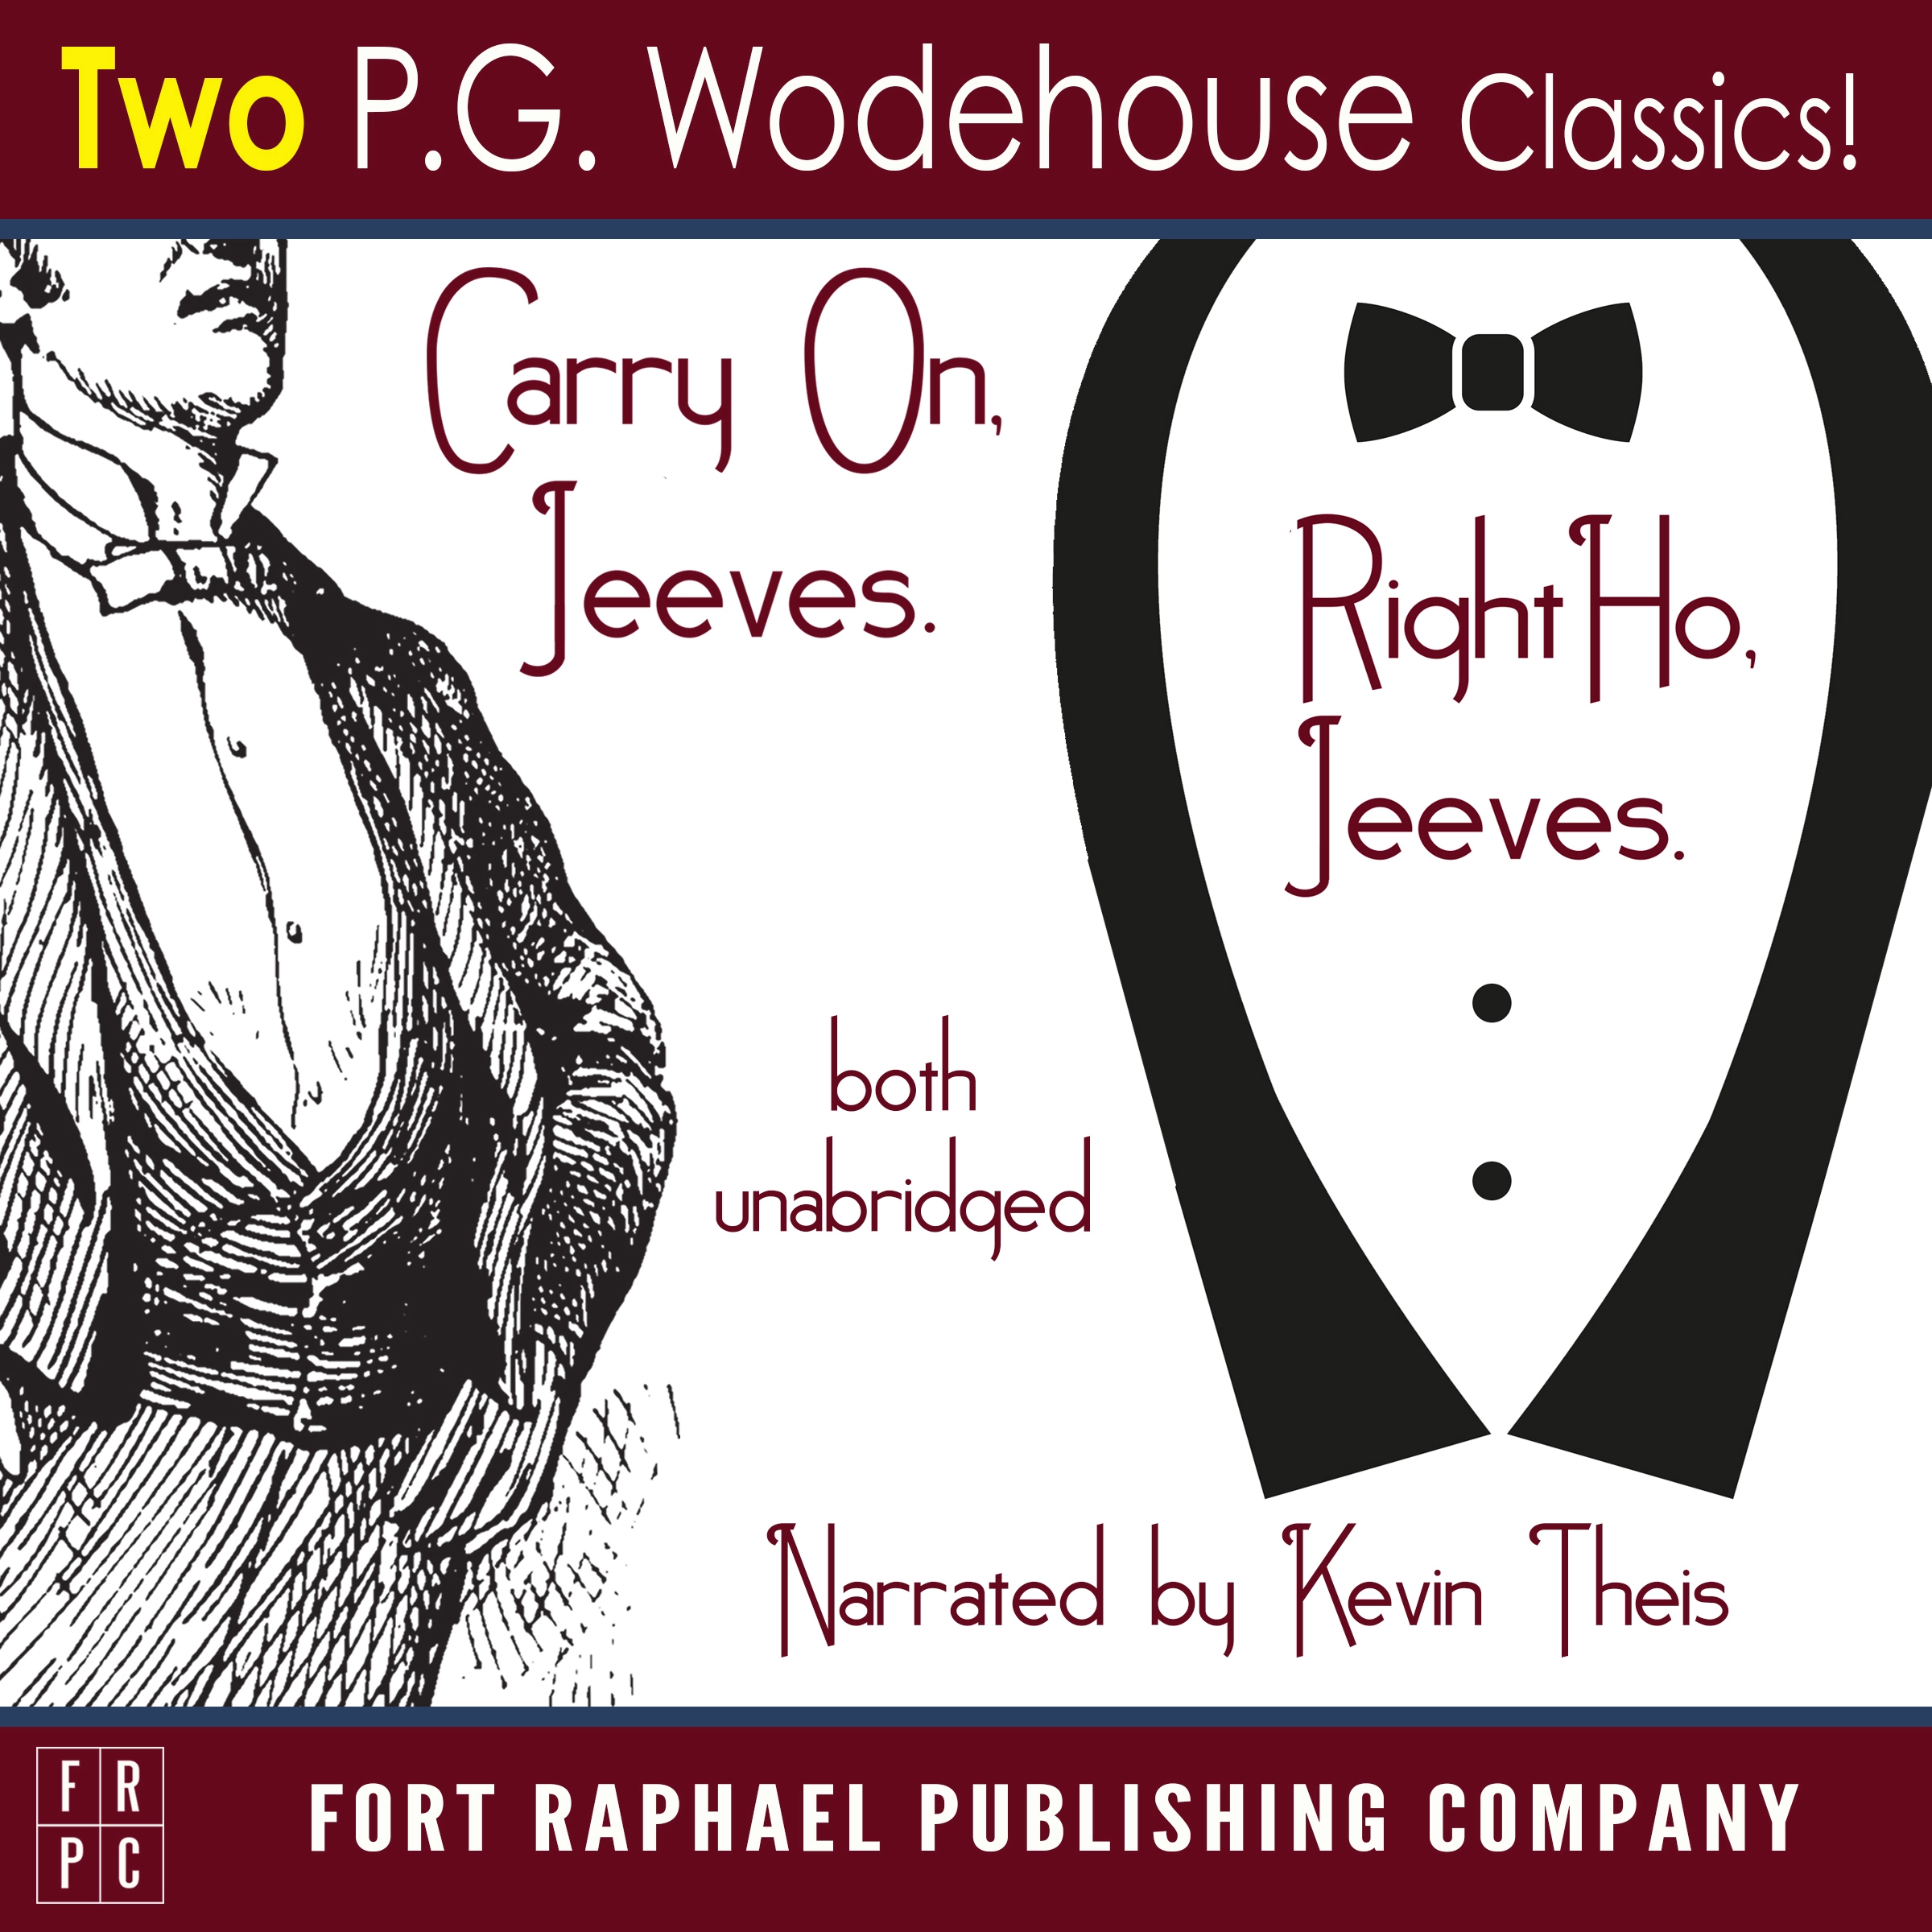 Carry on, Jeeves and Right Ho, Jeeves - TWO P.G. Wodehouse Classics! - Unabridged Audiobook by P.G. Wodehouse